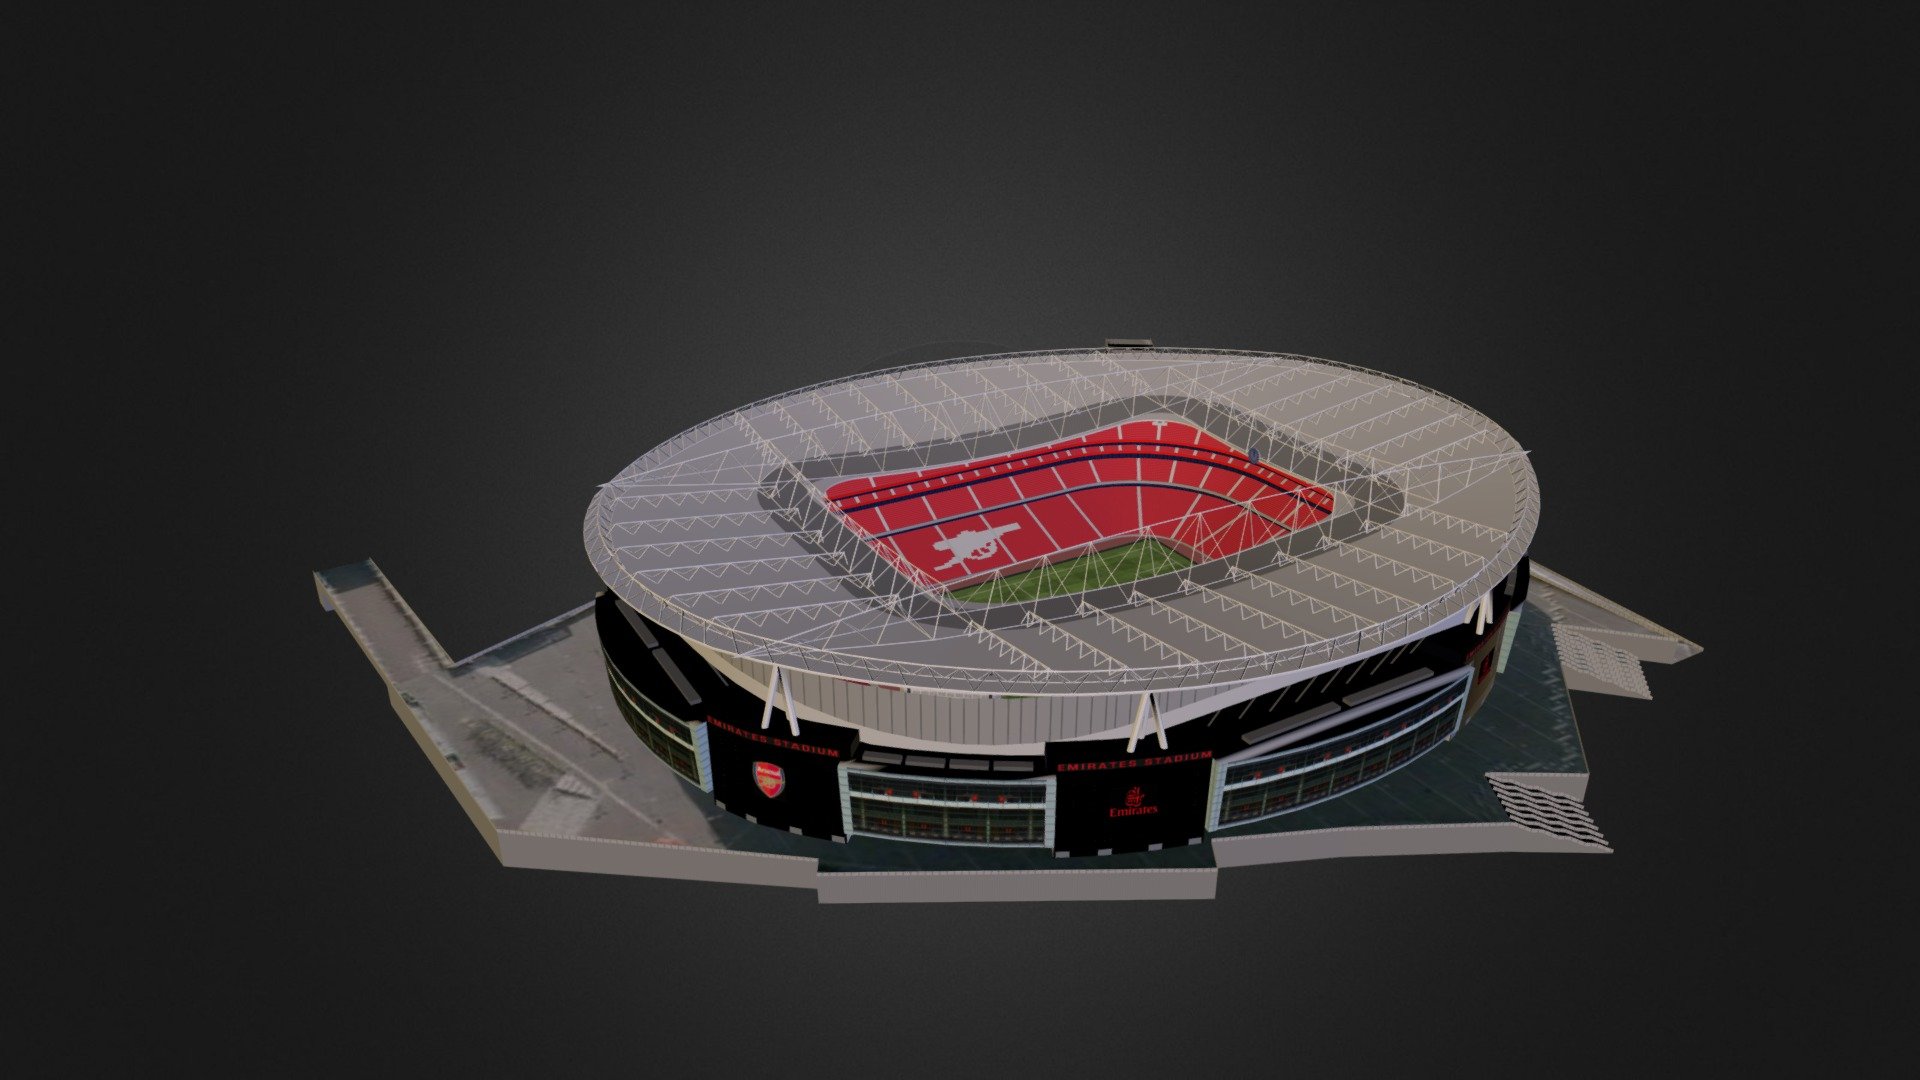 Capacity: 60,355. The Emirates Stadium has been the home of Arsenal F.C. since it opened in July 2006. The stadium project cost £430 million.
Model created by dizzyHARSH - Emirates Stadium - 3D model by PitchMap 3d model